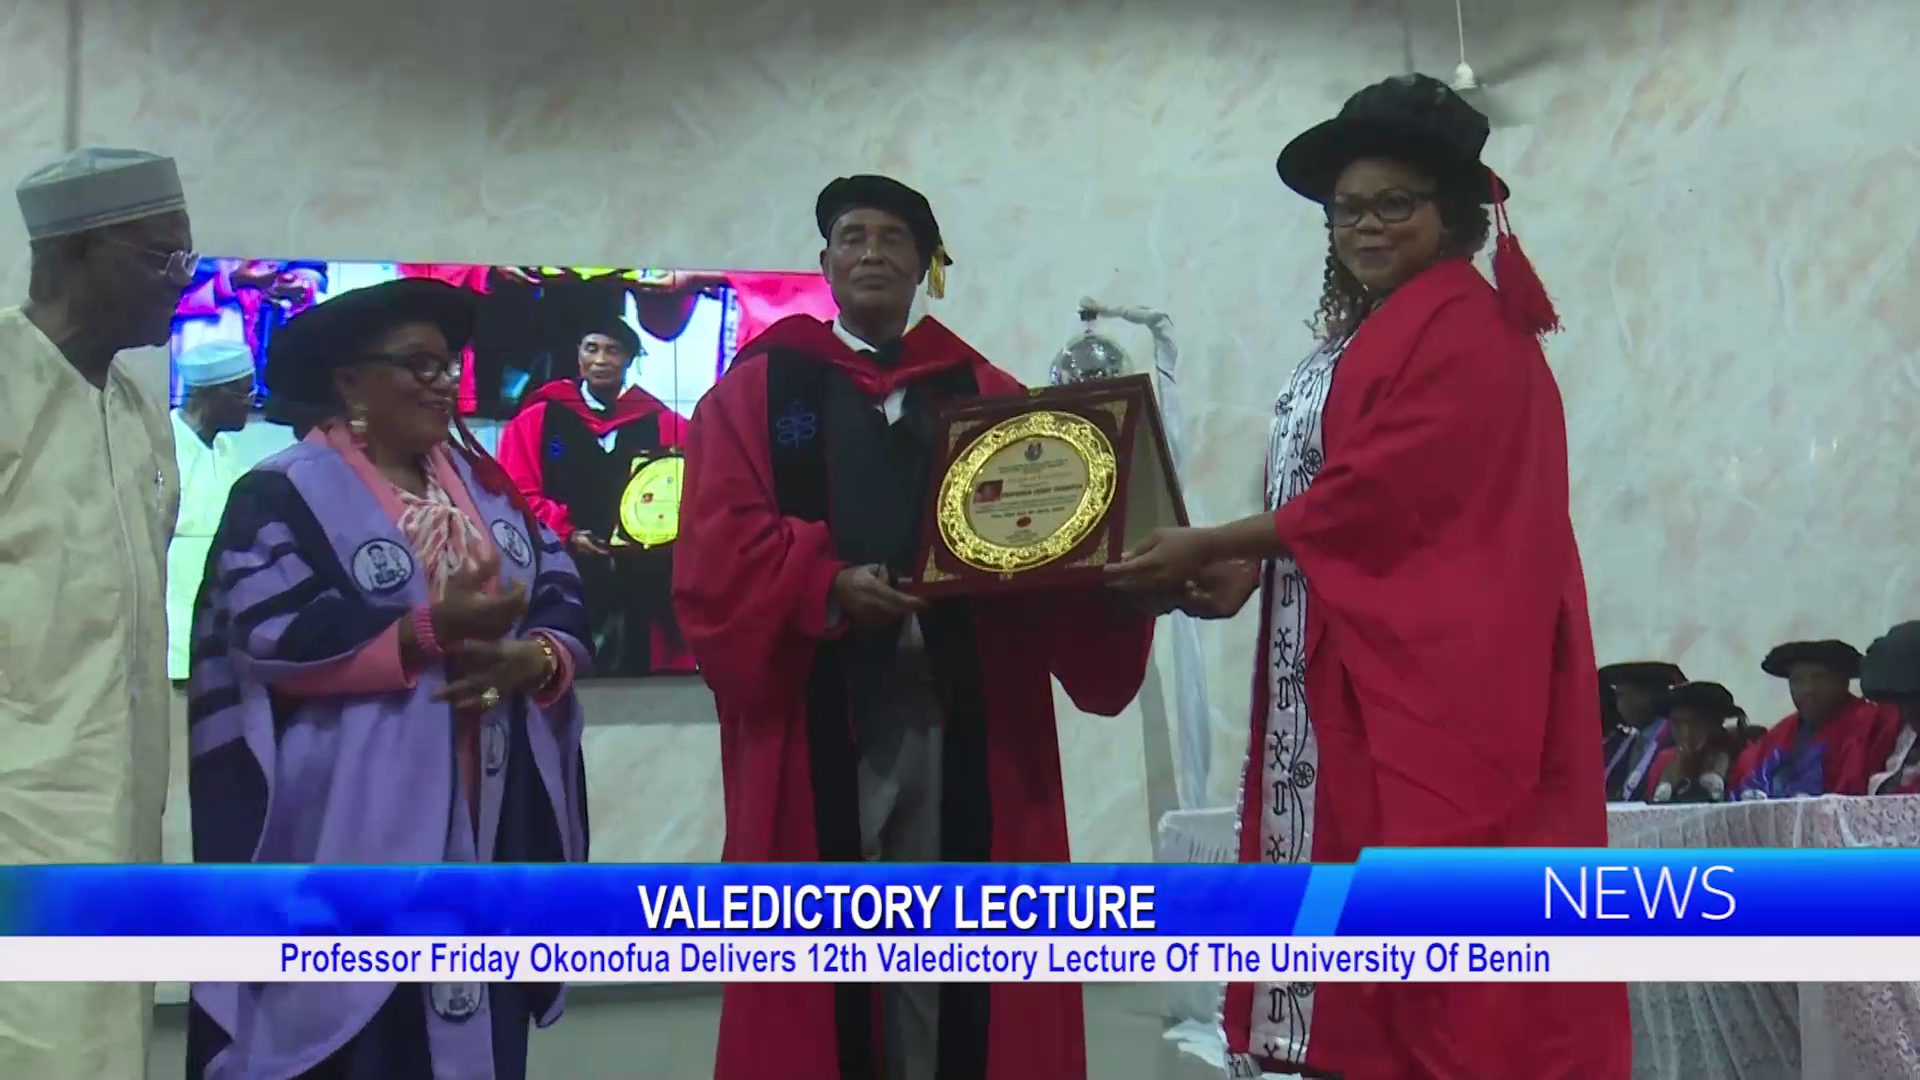 Professor Friday Okonofua Delivers 12th Valedictory Lecture Of The University Of Benin